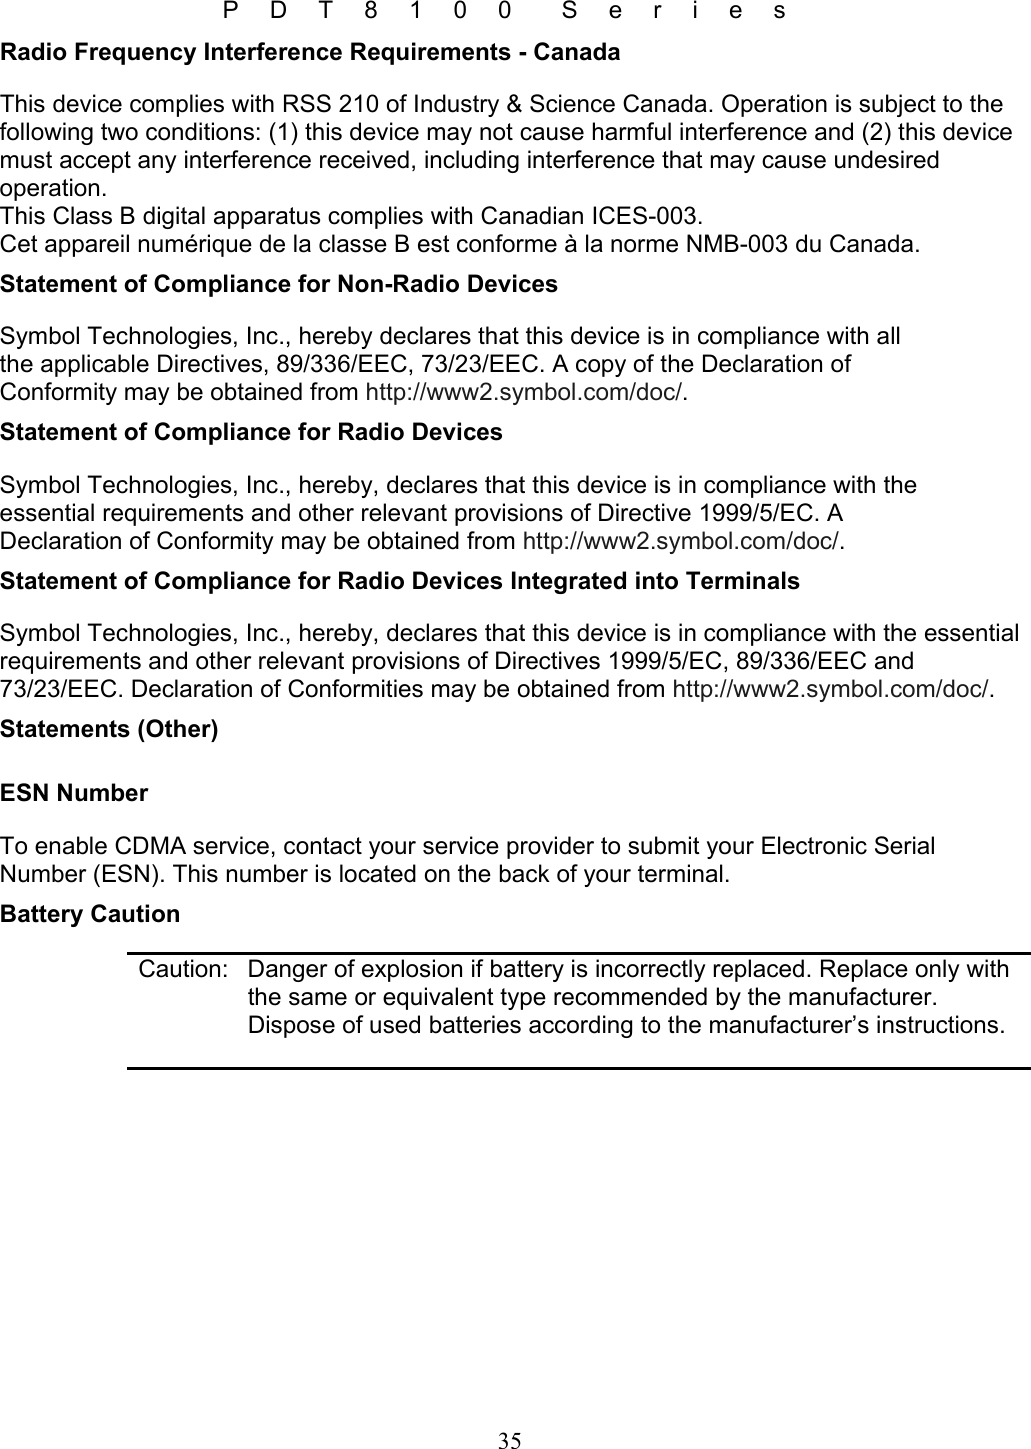 P D T 8 1 0 0  S e r i e s 35 Radio Frequency Interference Requirements - Canada This device complies with RSS 210 of Industry &amp; Science Canada. Operation is subject to the following two conditions: (1) this device may not cause harmful interference and (2) this device must accept any interference received, including interference that may cause undesired operation. This Class B digital apparatus complies with Canadian ICES-003. Cet appareil numérique de la classe B est conforme à la norme NMB-003 du Canada. Statement of Compliance for Non-Radio Devices Symbol Technologies, Inc., hereby declares that this device is in compliance with all the applicable Directives, 89/336/EEC, 73/23/EEC. A copy of the Declaration of Conformity may be obtained from http://www2.symbol.com/doc/. Statement of Compliance for Radio Devices Symbol Technologies, Inc., hereby, declares that this device is in compliance with the essential requirements and other relevant provisions of Directive 1999/5/EC. A Declaration of Conformity may be obtained from http://www2.symbol.com/doc/. Statement of Compliance for Radio Devices Integrated into Terminals Symbol Technologies, Inc., hereby, declares that this device is in compliance with the essential requirements and other relevant provisions of Directives 1999/5/EC, 89/336/EEC and 73/23/EEC. Declaration of Conformities may be obtained from http://www2.symbol.com/doc/. Statements (Other) ESN Number To enable CDMA service, contact your service provider to submit your Electronic Serial Number (ESN). This number is located on the back of your terminal. Battery Caution   Caution:  Danger of explosion if battery is incorrectly replaced. Replace only with the same or equivalent type recommended by the manufacturer. Dispose of used batteries according to the manufacturer’s instructions.   